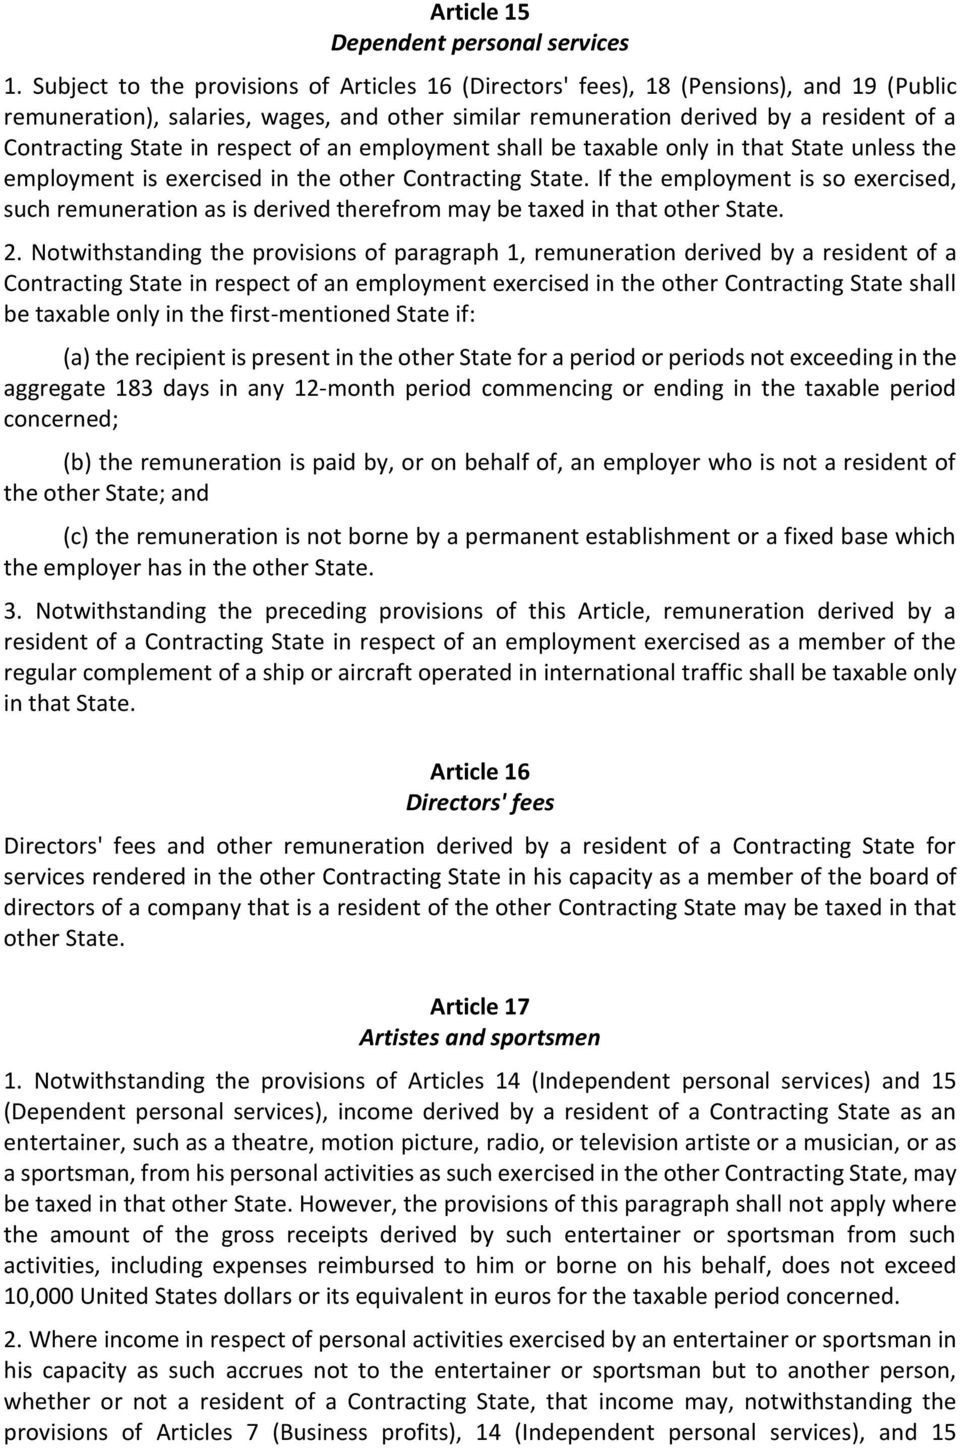 in respect of an employment shall be taxable only in that State unless the employment is exercised in the other Contracting State.